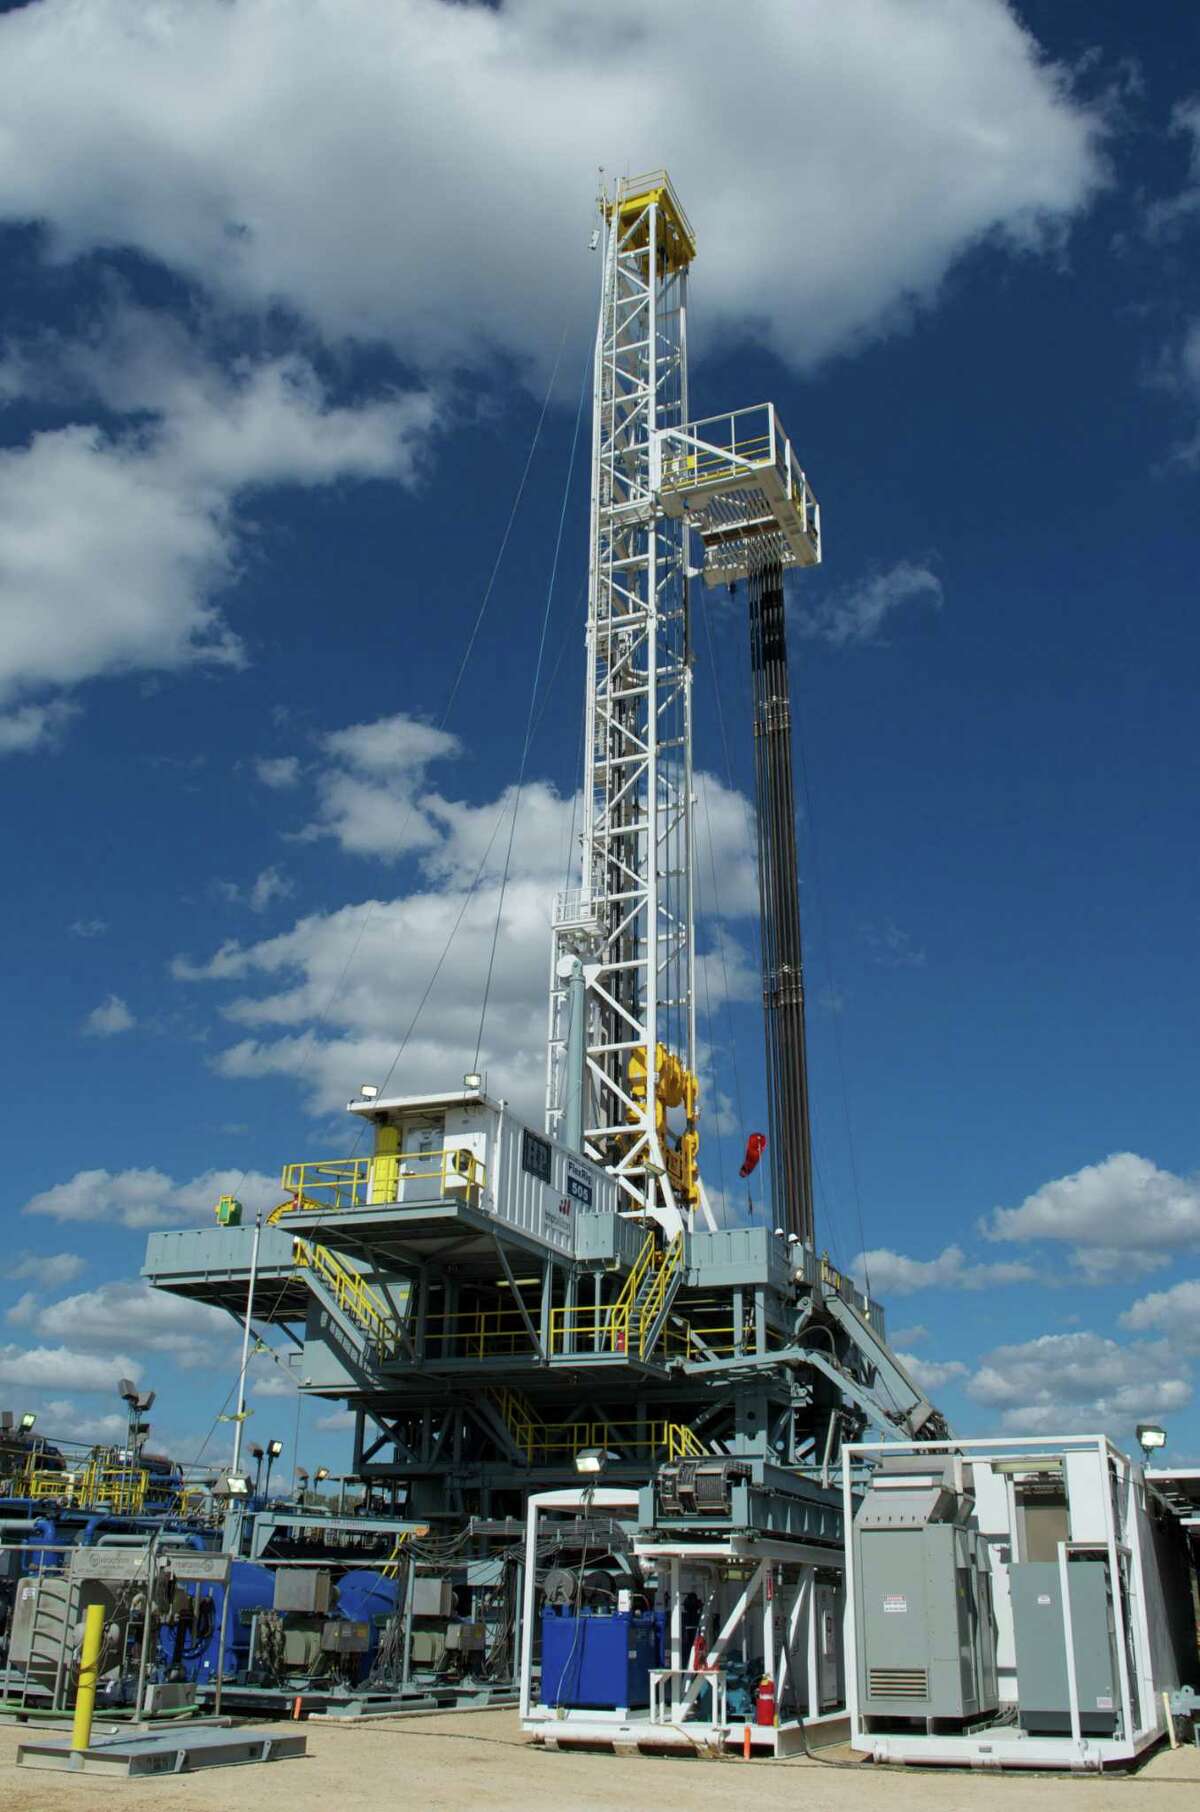 One of BHP Billiton Petroleum’s Eagle Ford drilling rigs. The company had as many as 42 rigs working in the Eagle Ford in 2012.